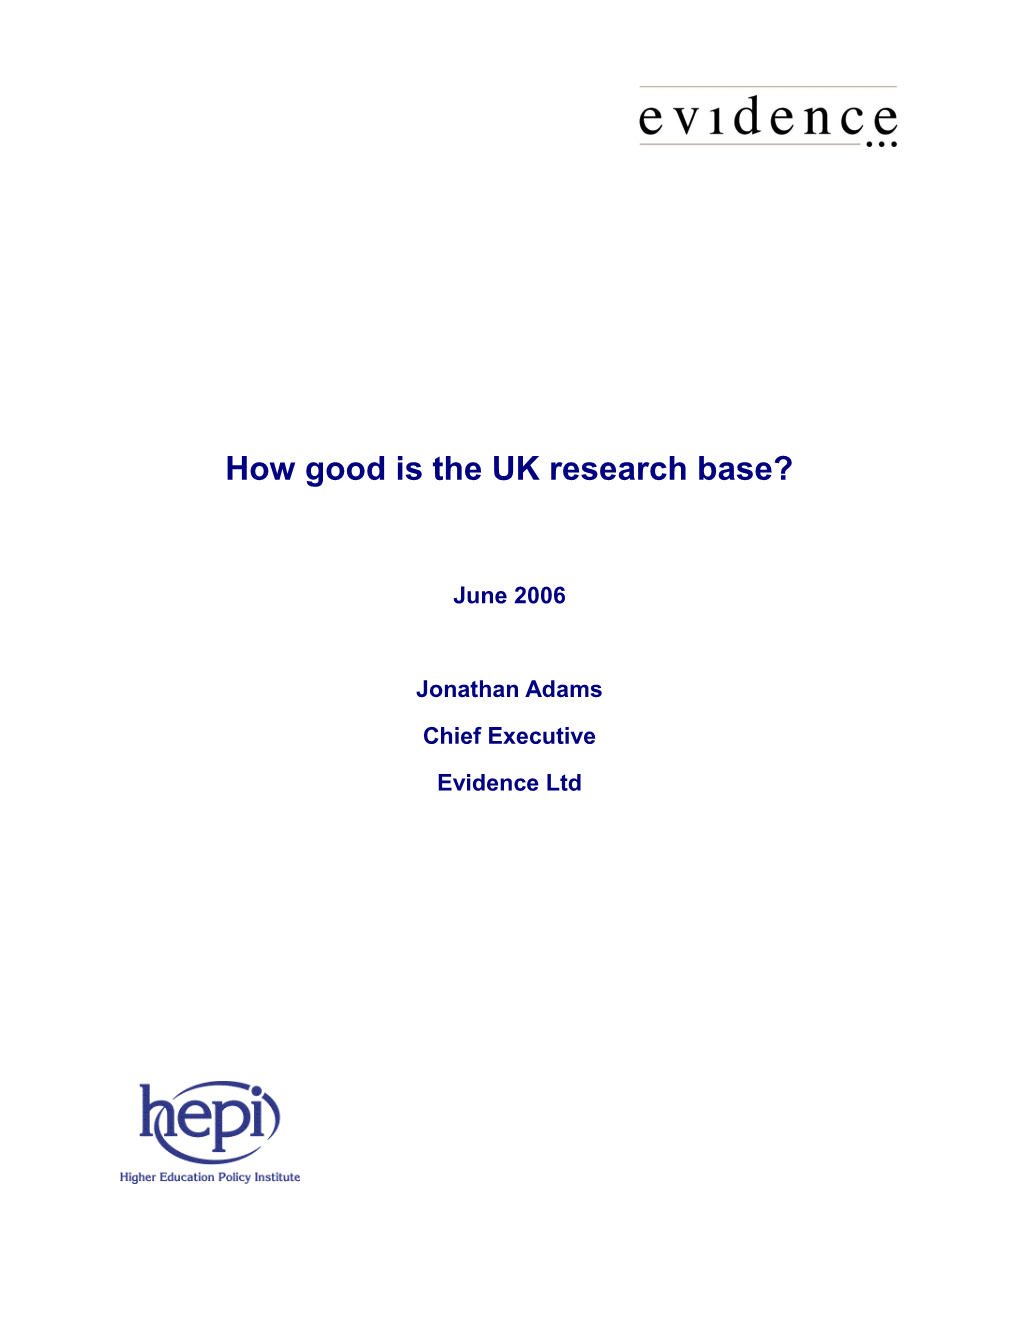 How Good Is the UK Research Base?